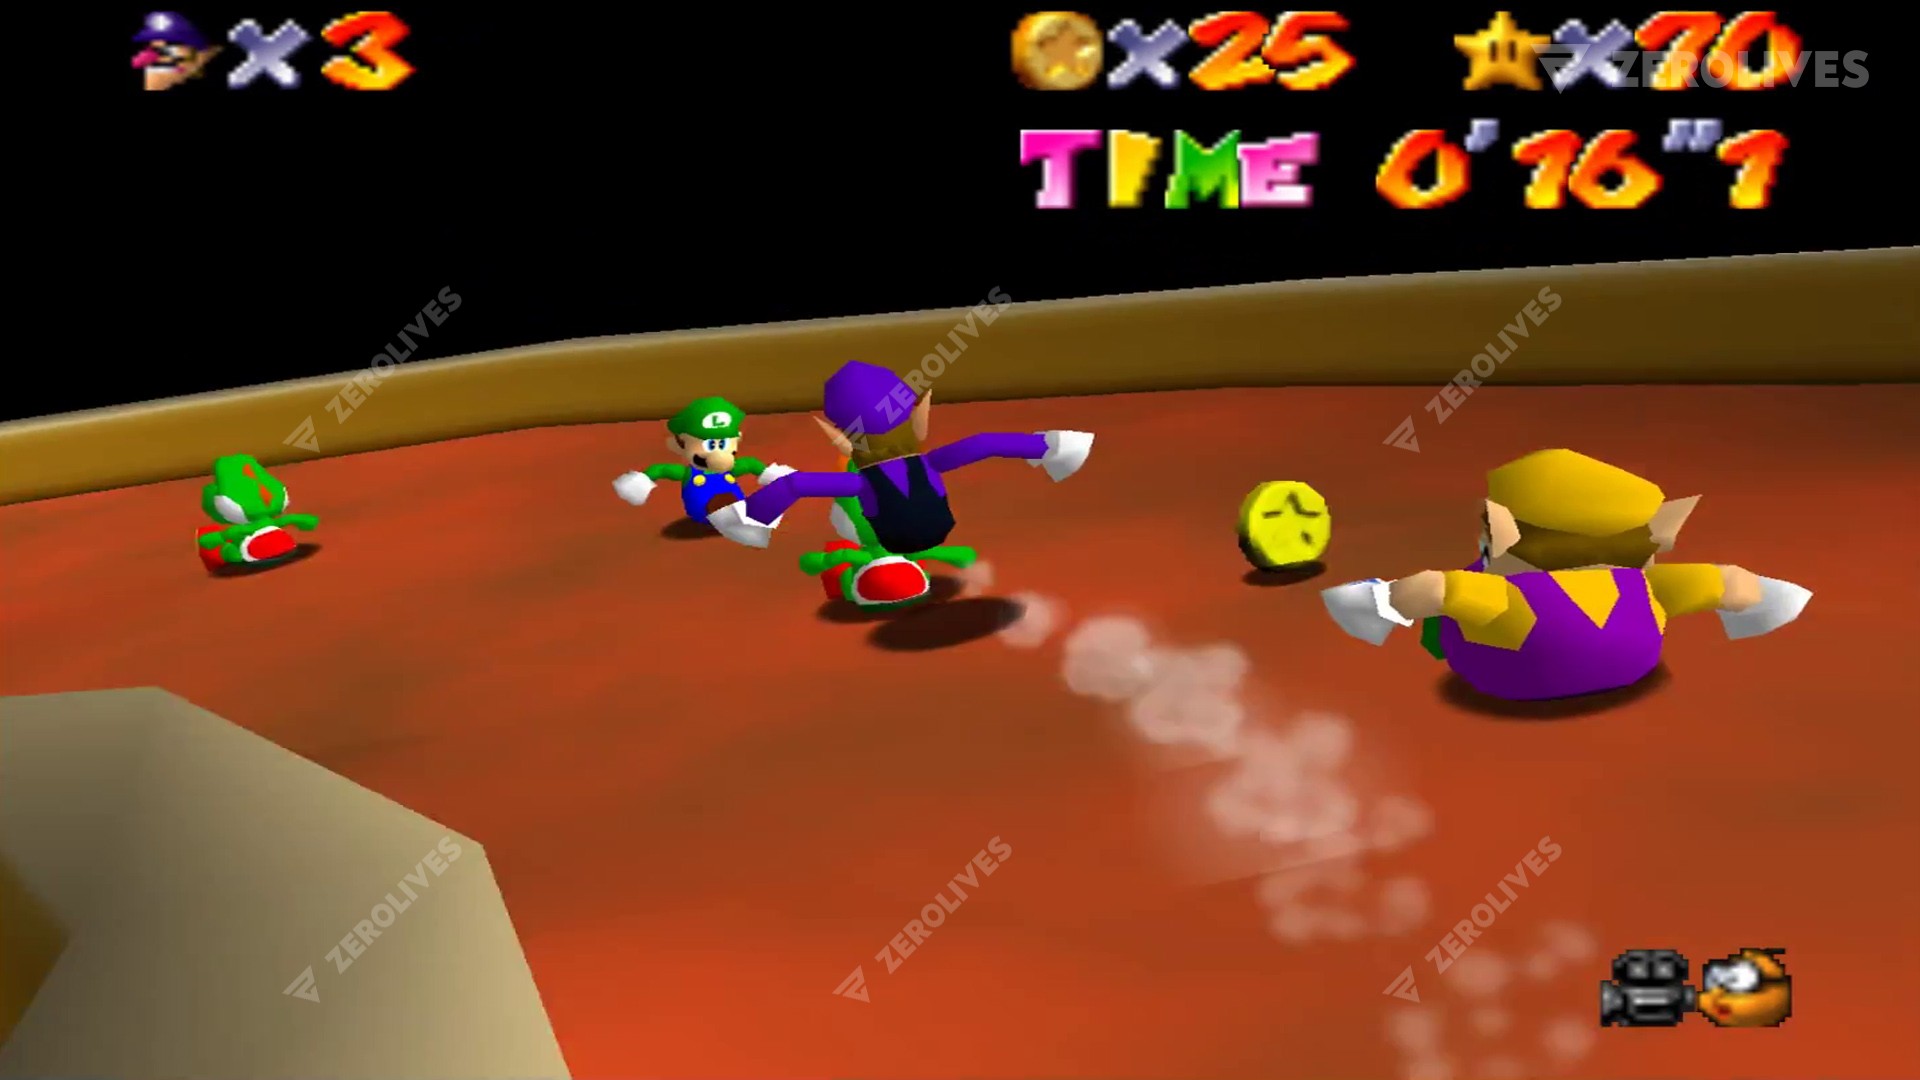 super mario 64 online crashes when playing with other characters